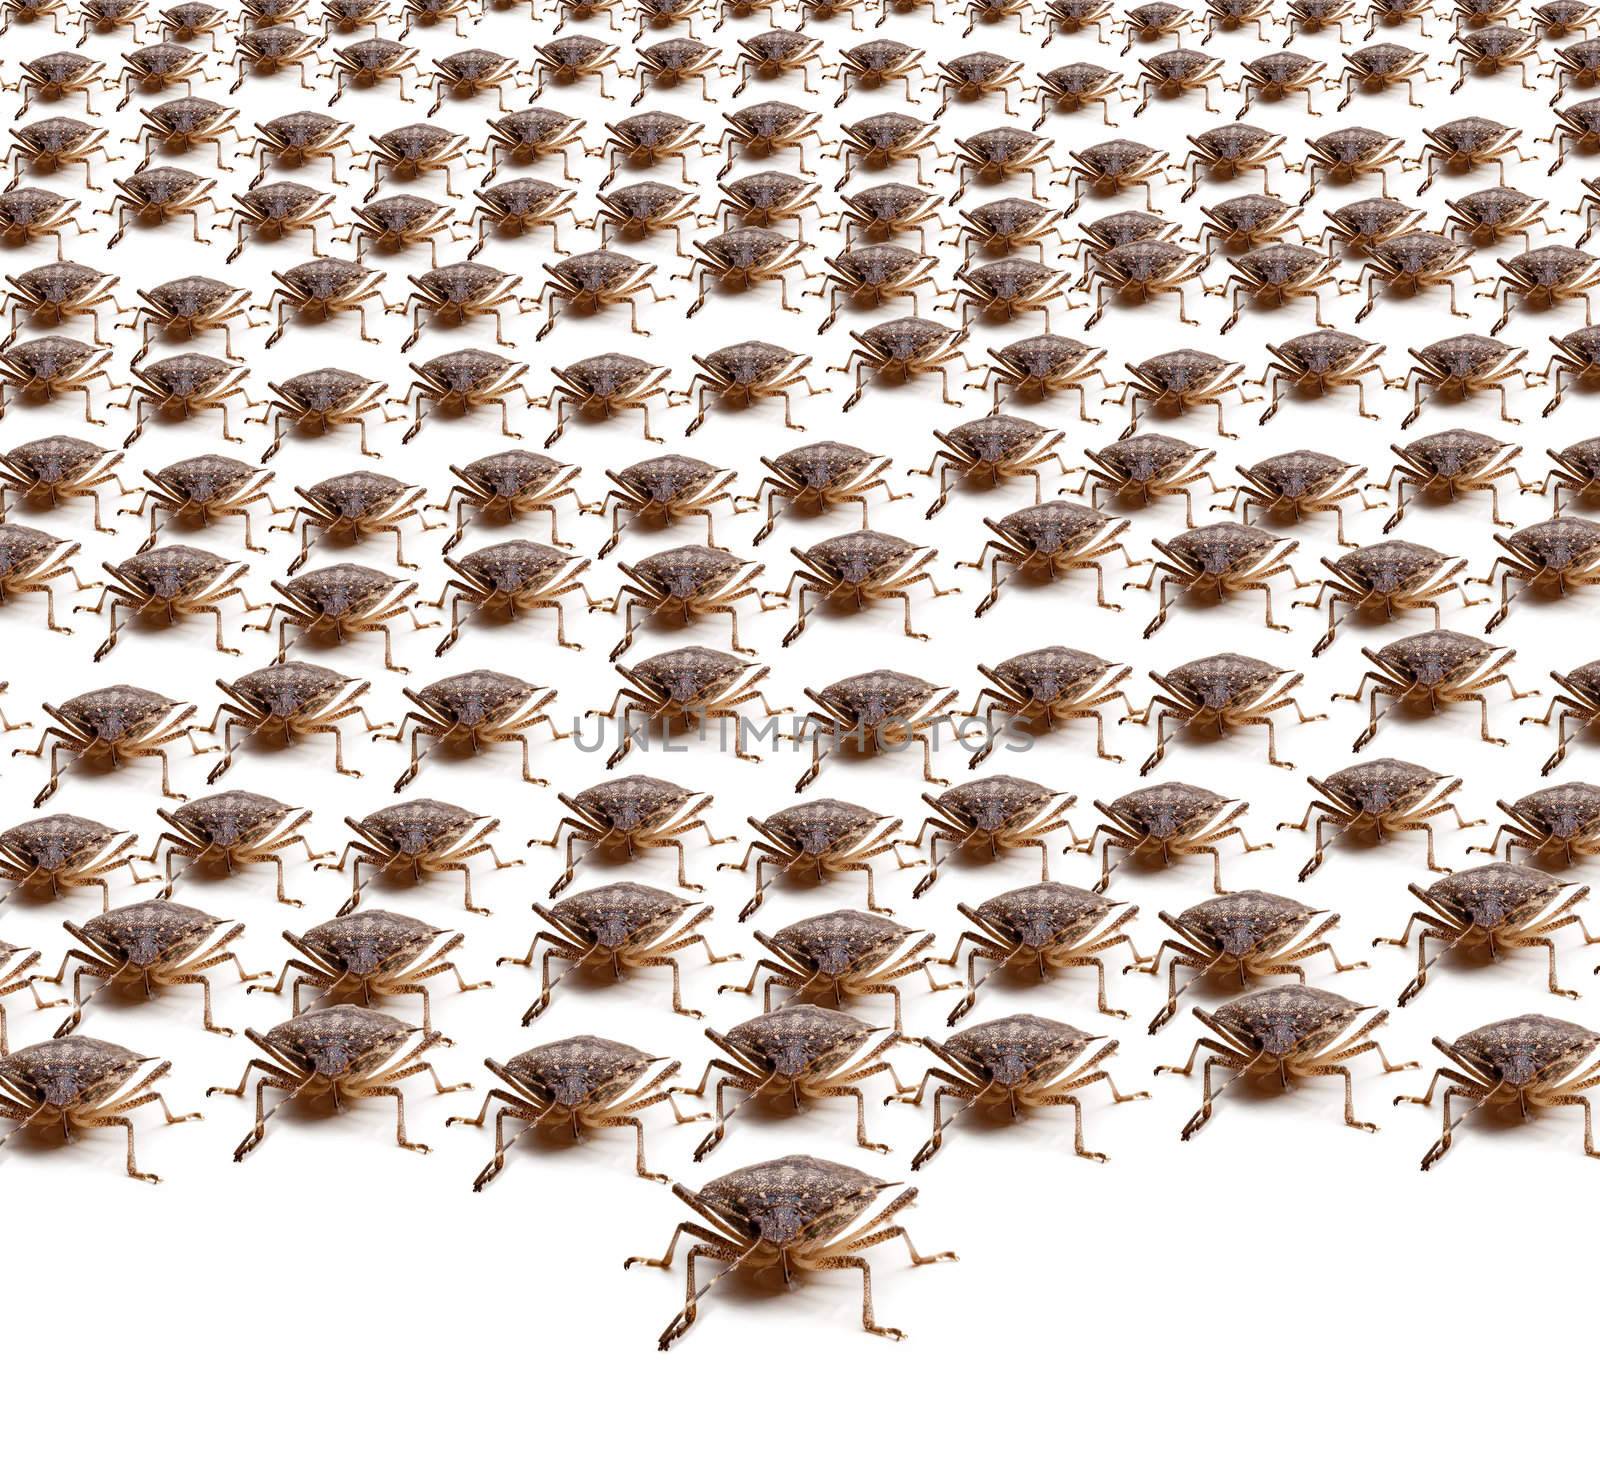 Large crowd of Brown Marmorated Stink Bug or Shield Bug isolated against white background